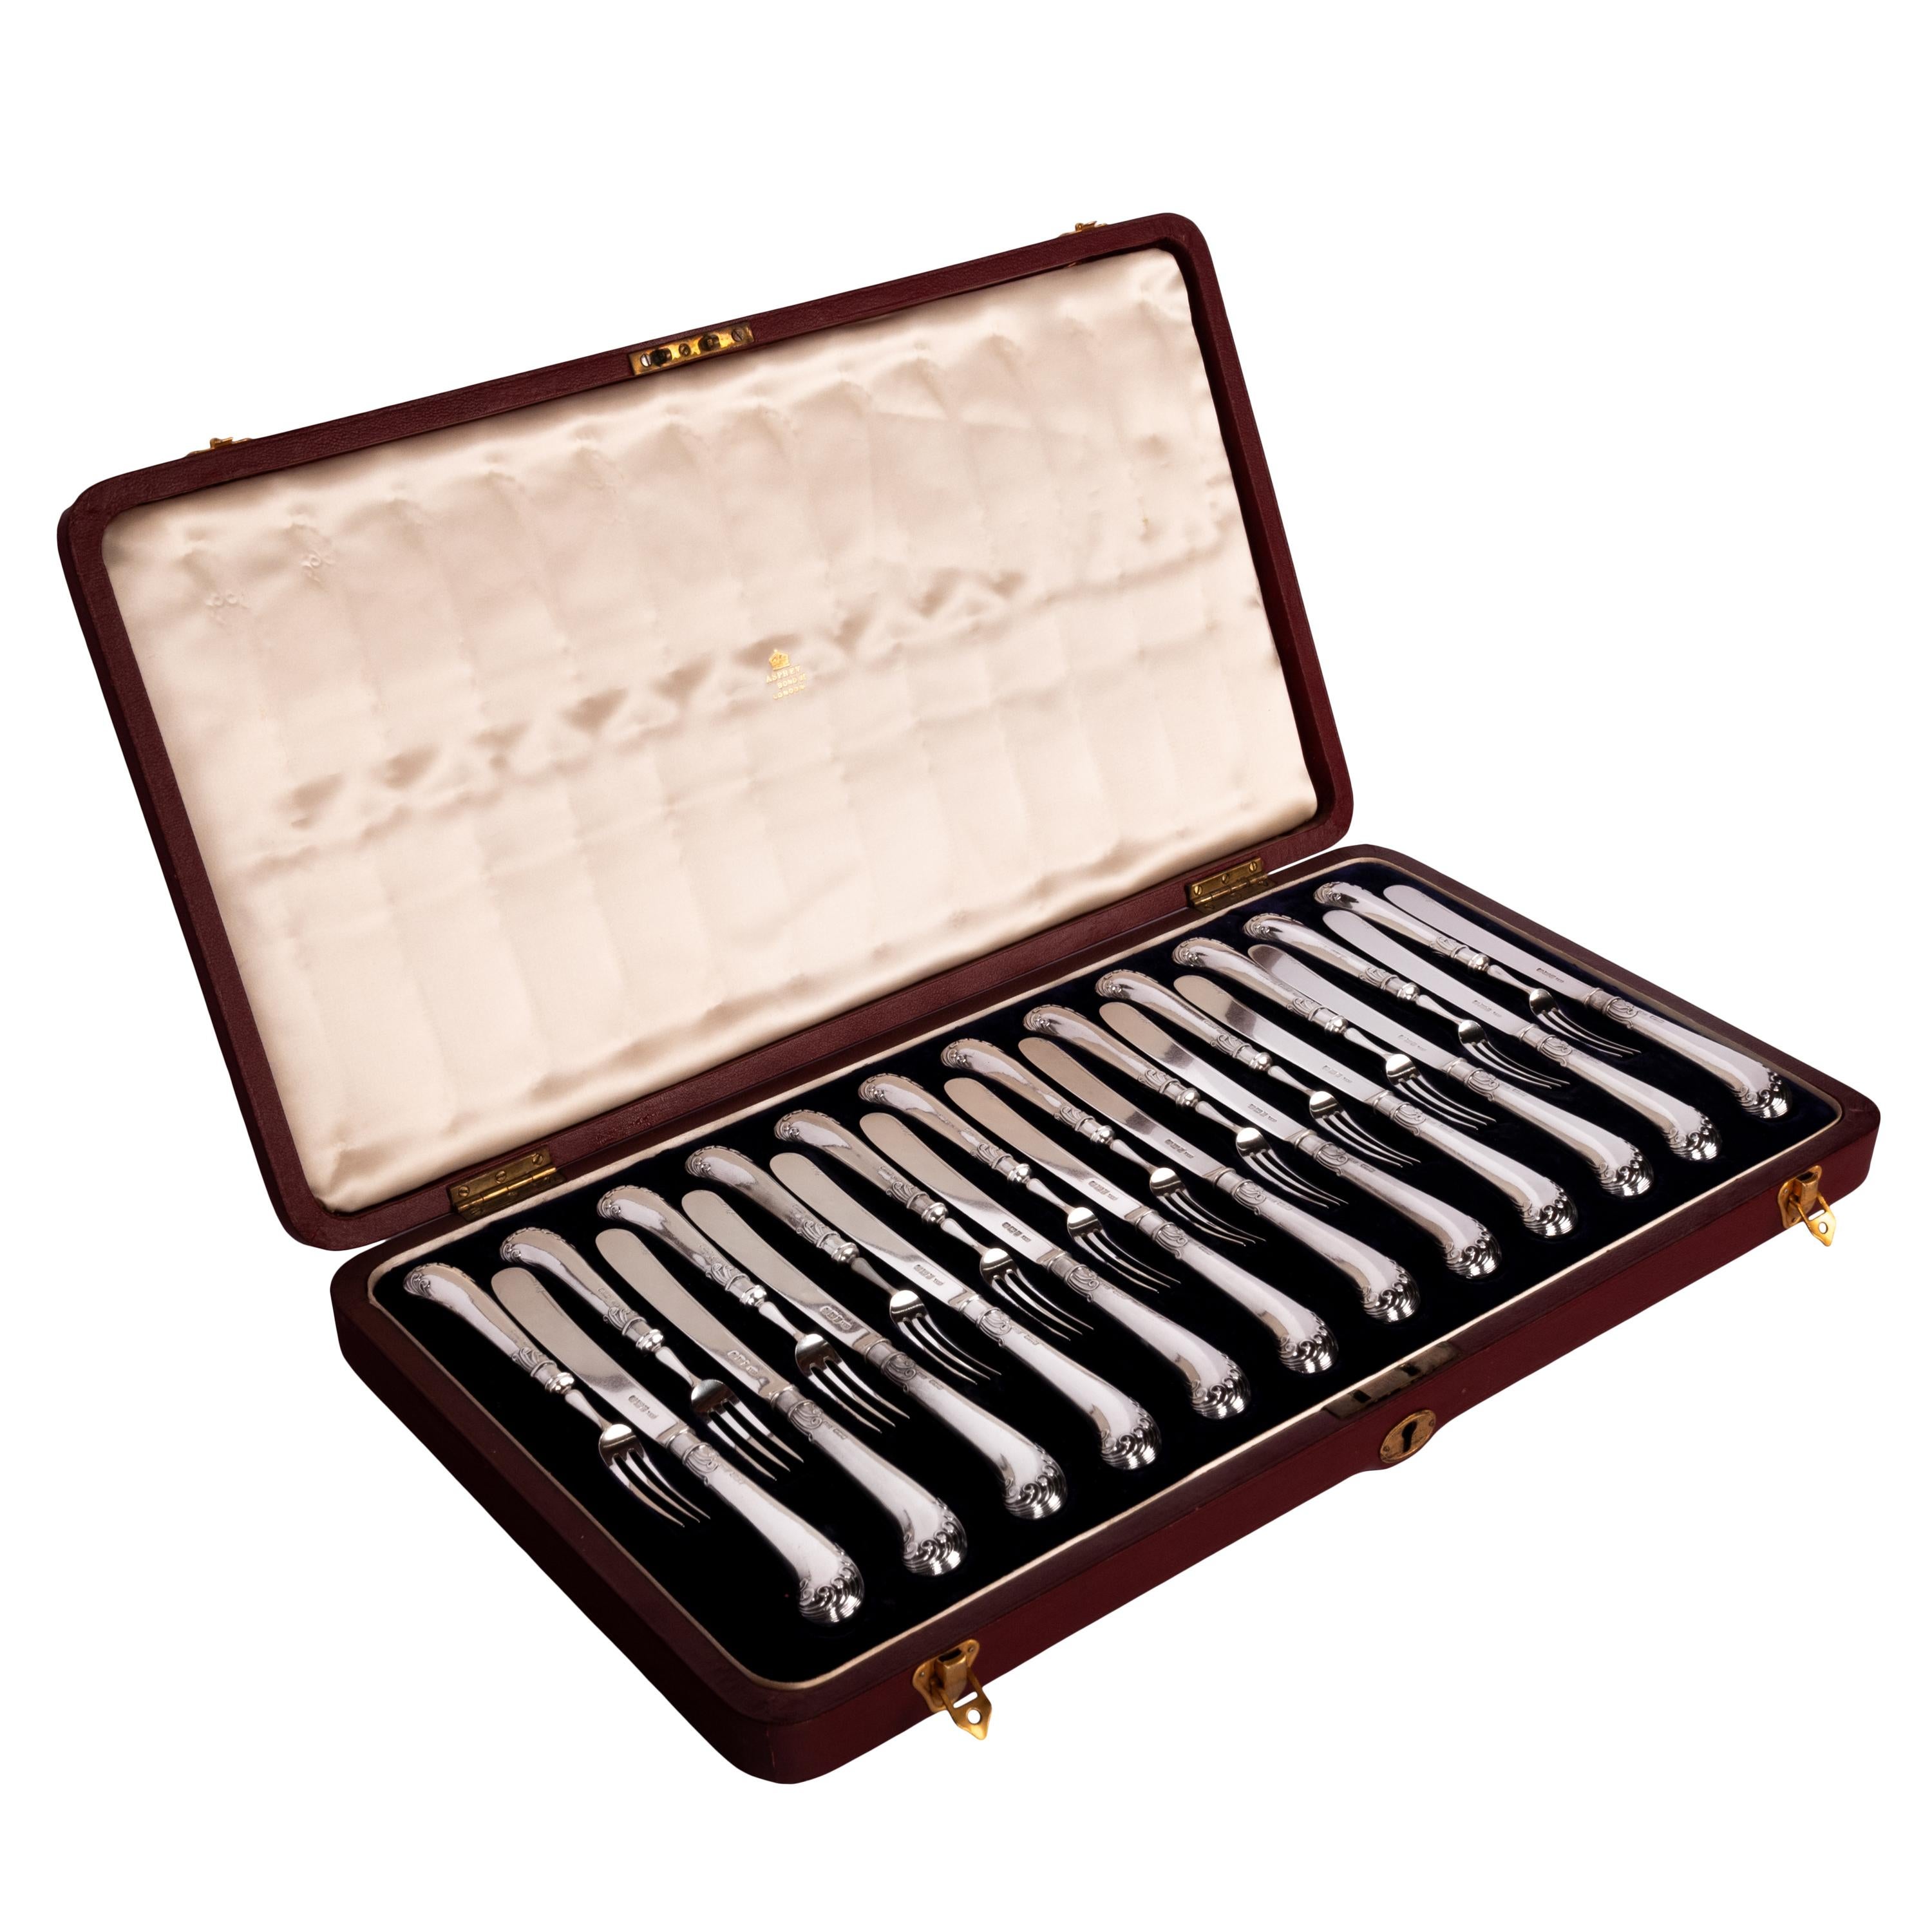 A fine antique cased sterling silver fruit/dessert service for 12 people, made by Allen & Darwin, Sheffield & retailed by Asprey London, dated 1902. Silver weight 34 oz (964 grams)
The set made totally of solid sterling silver; the handles, blades &